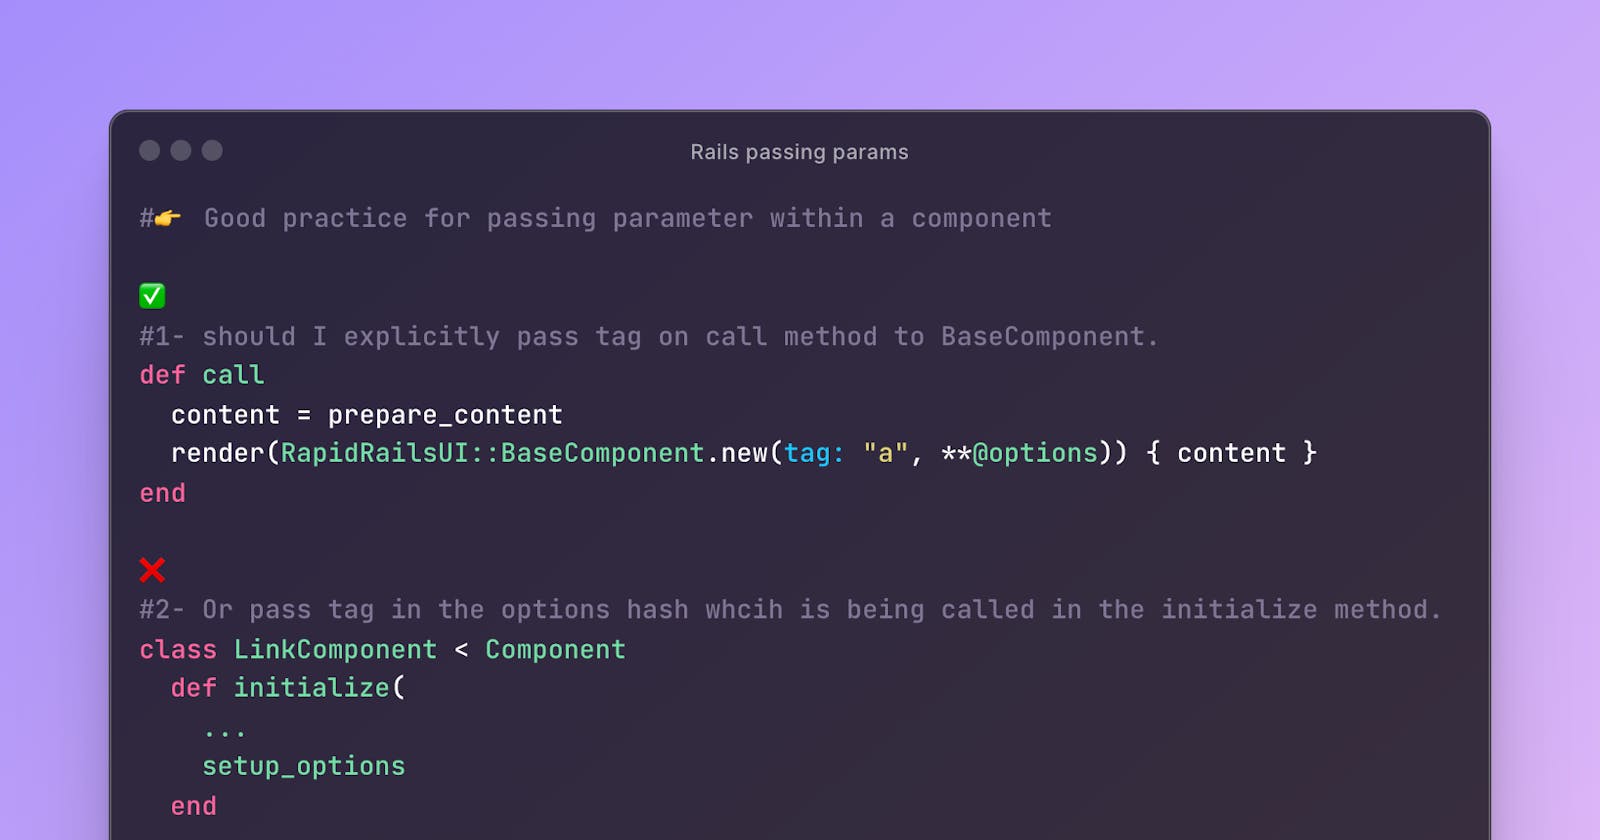 How I decide to pass on a parameter within a component.